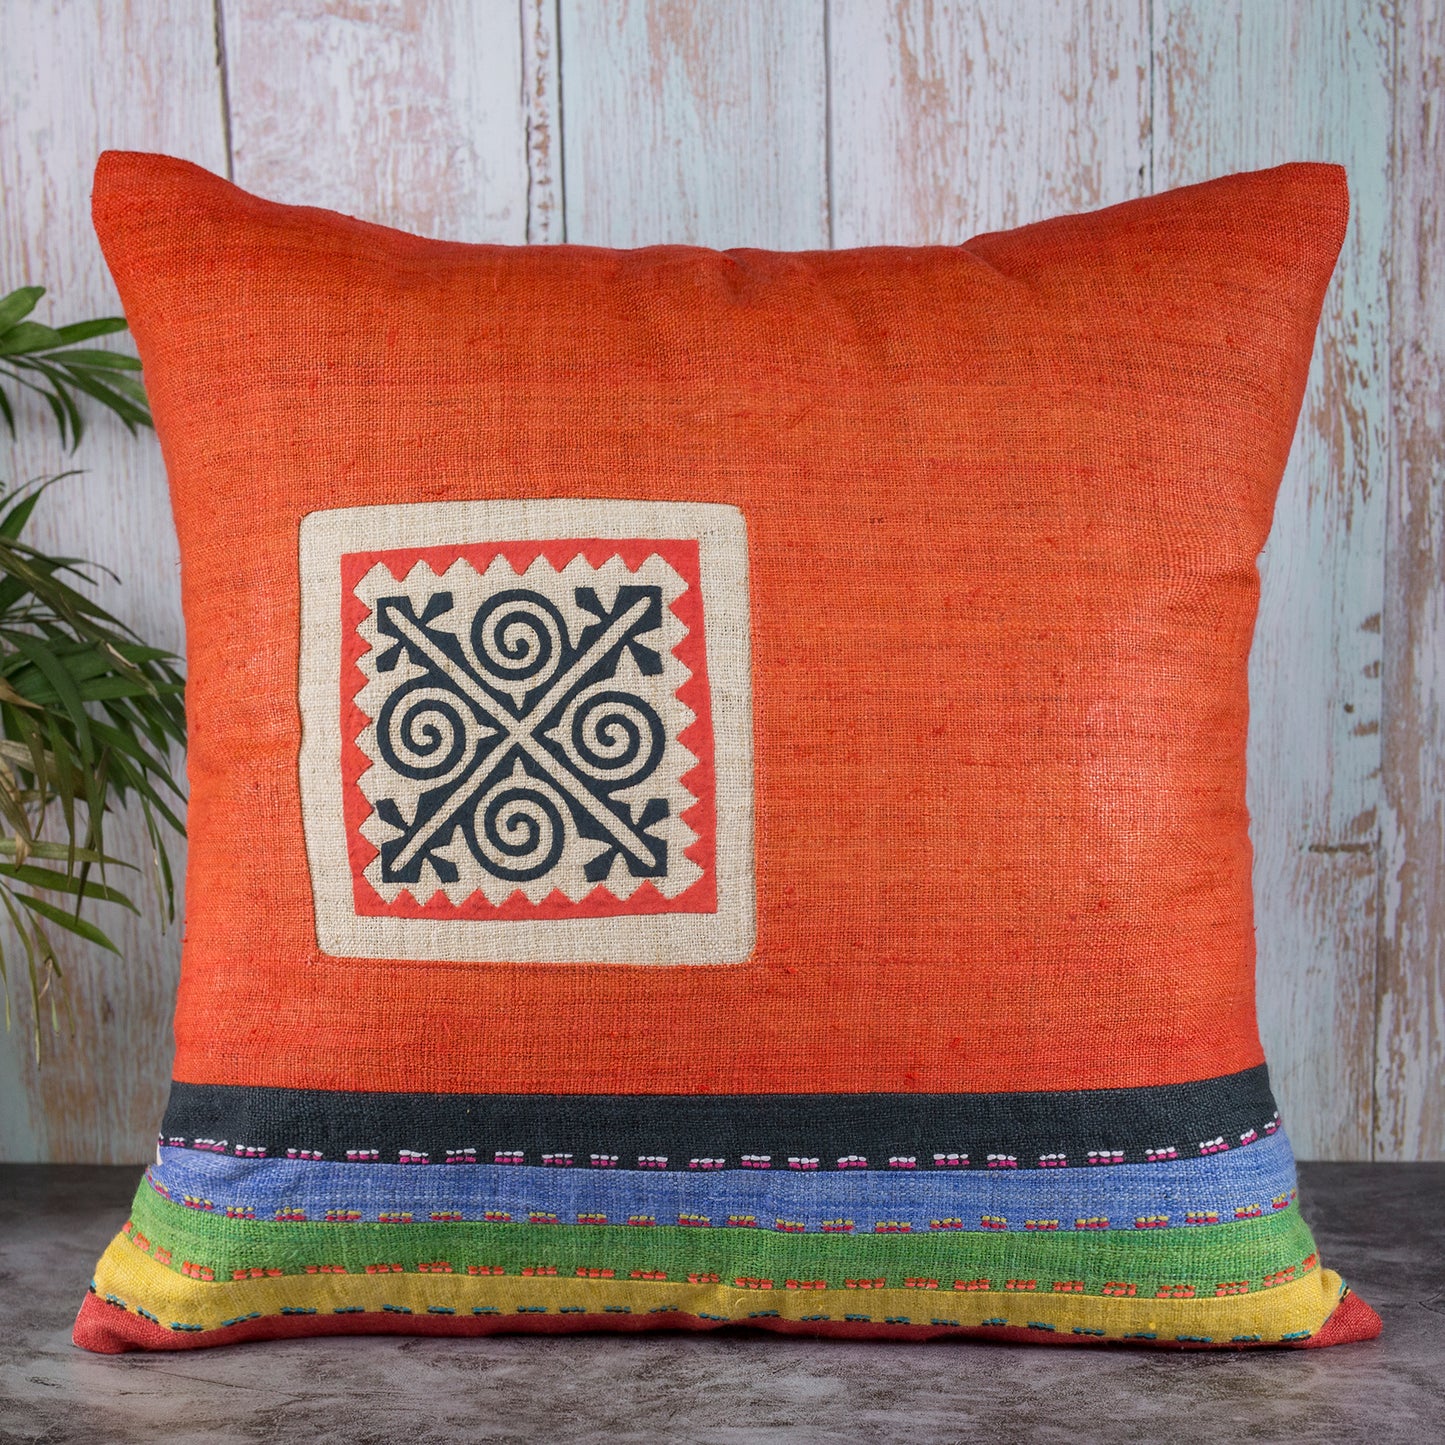 Orange Hemp Cushion Cover with stripes in different colors, hand-stitched pattern in black and orange